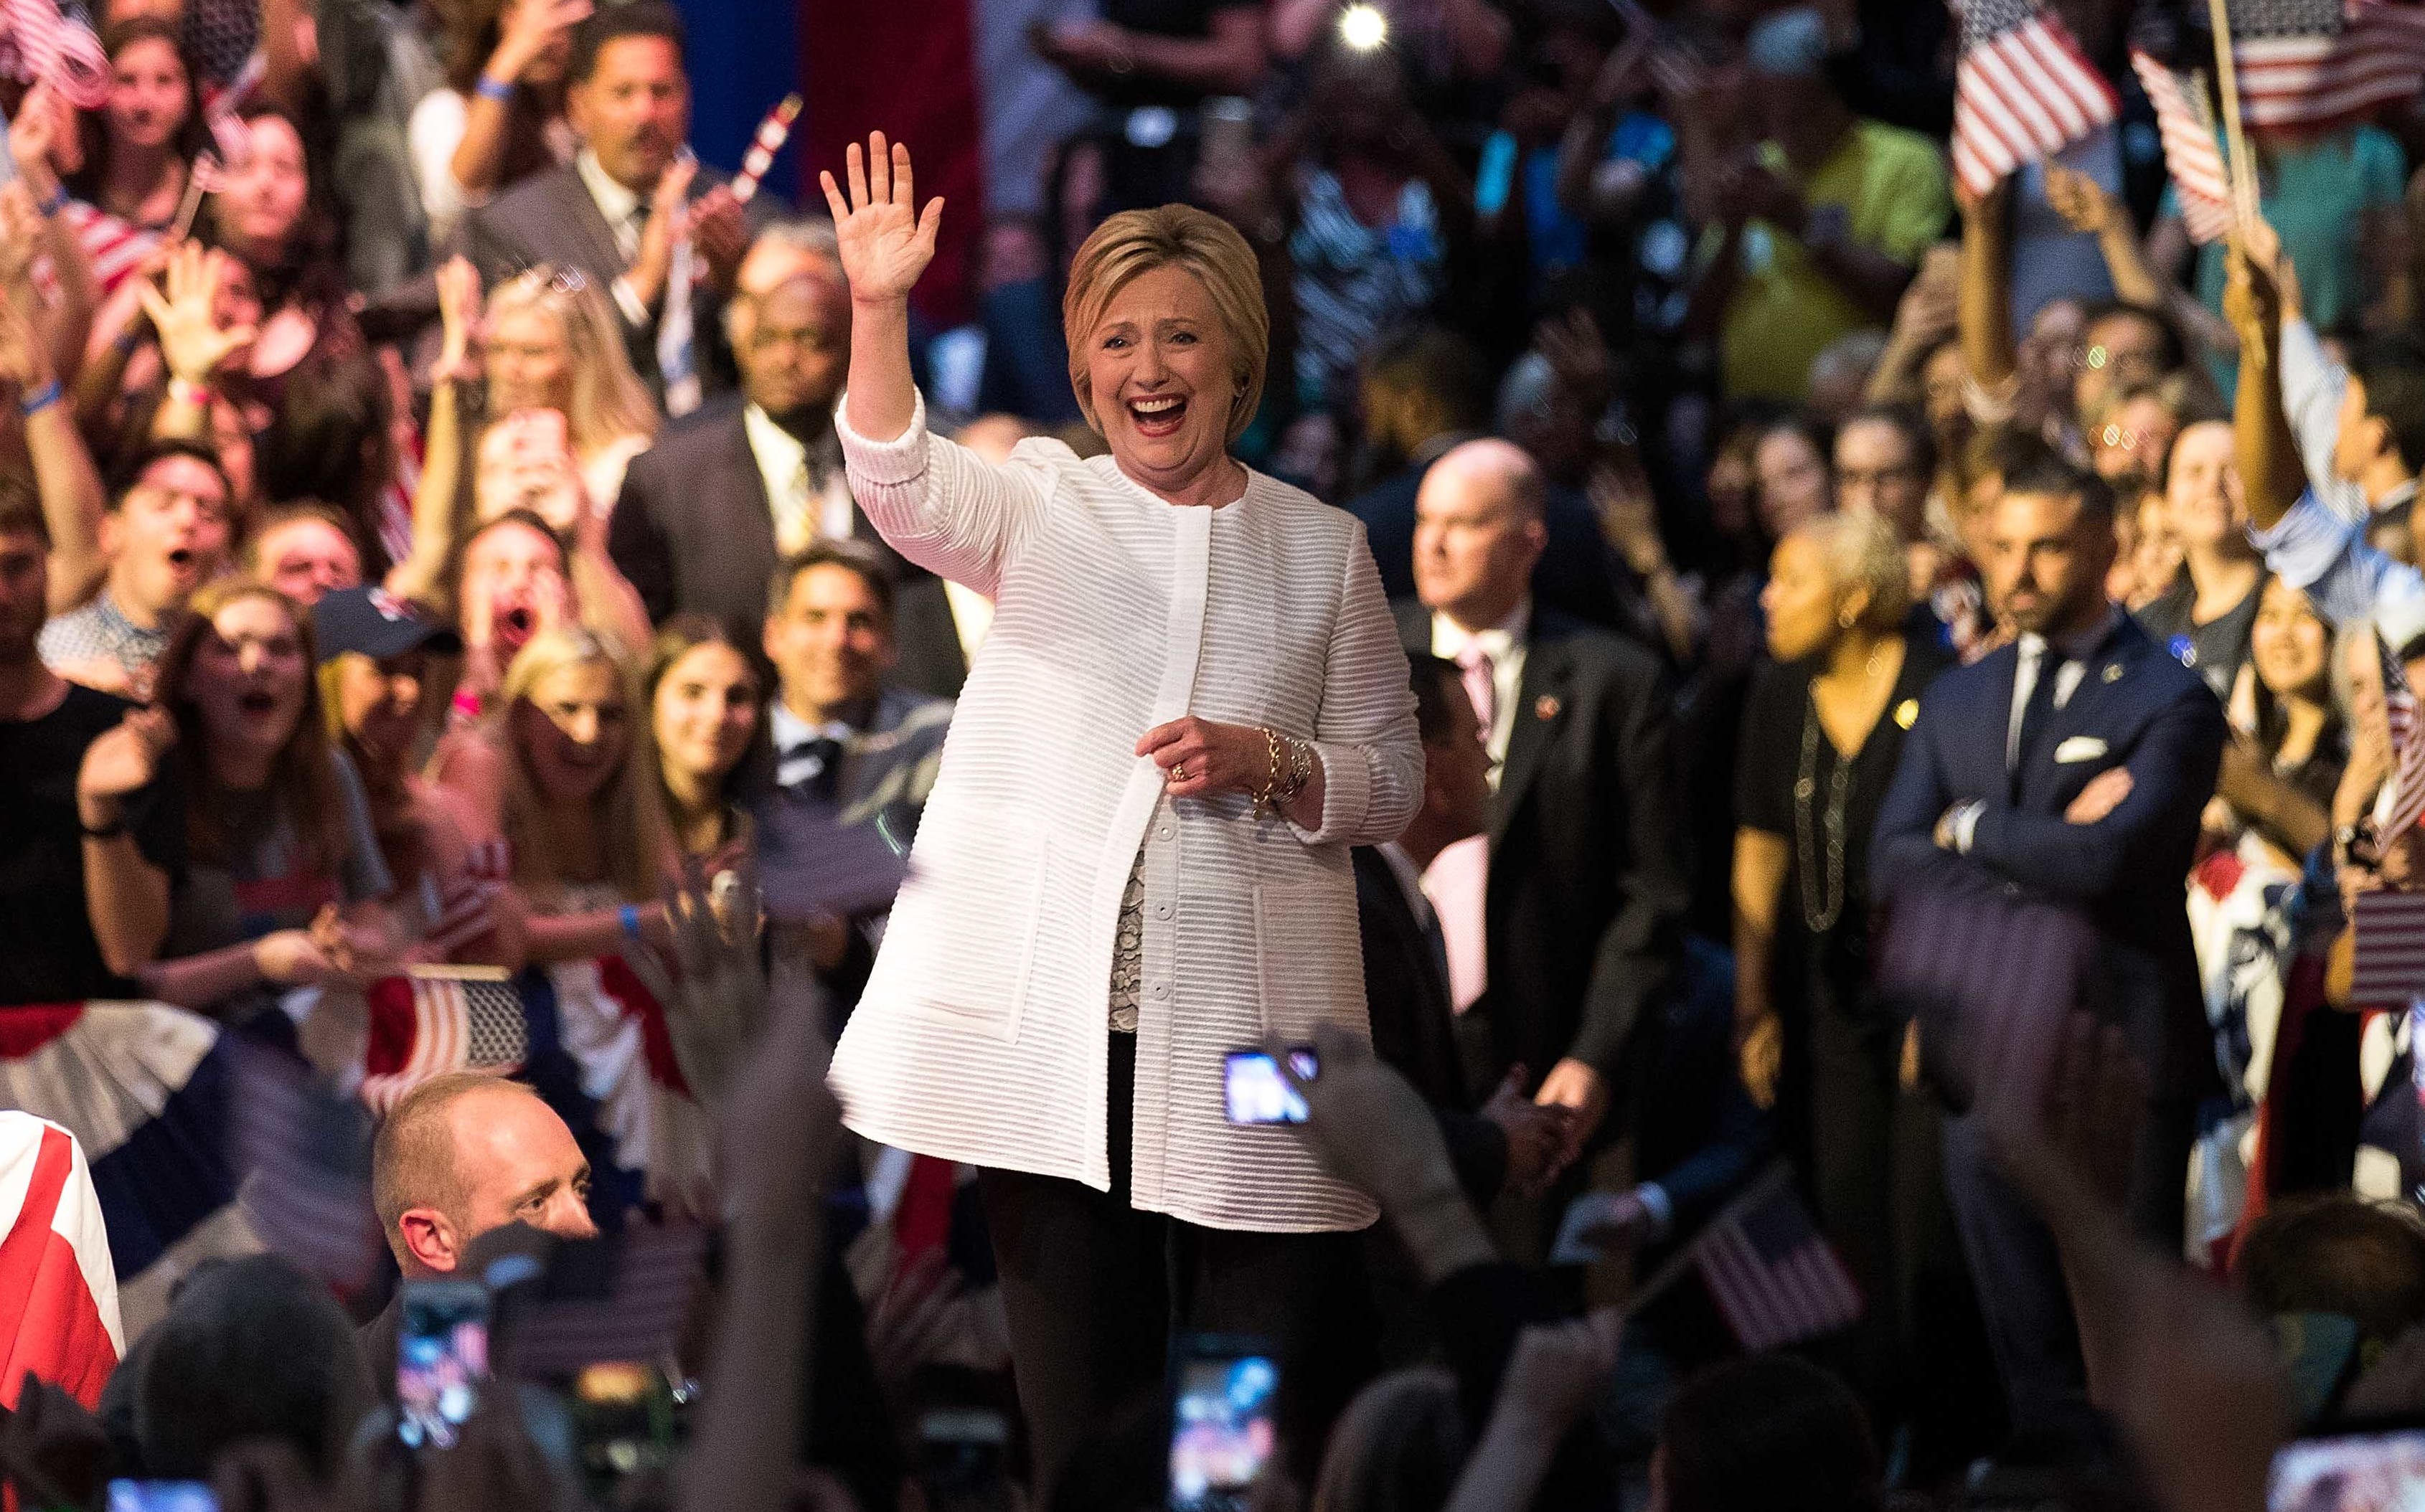 Democratic presidential candidate Hillary Clinton arrives onstage to deliver her victory speech.